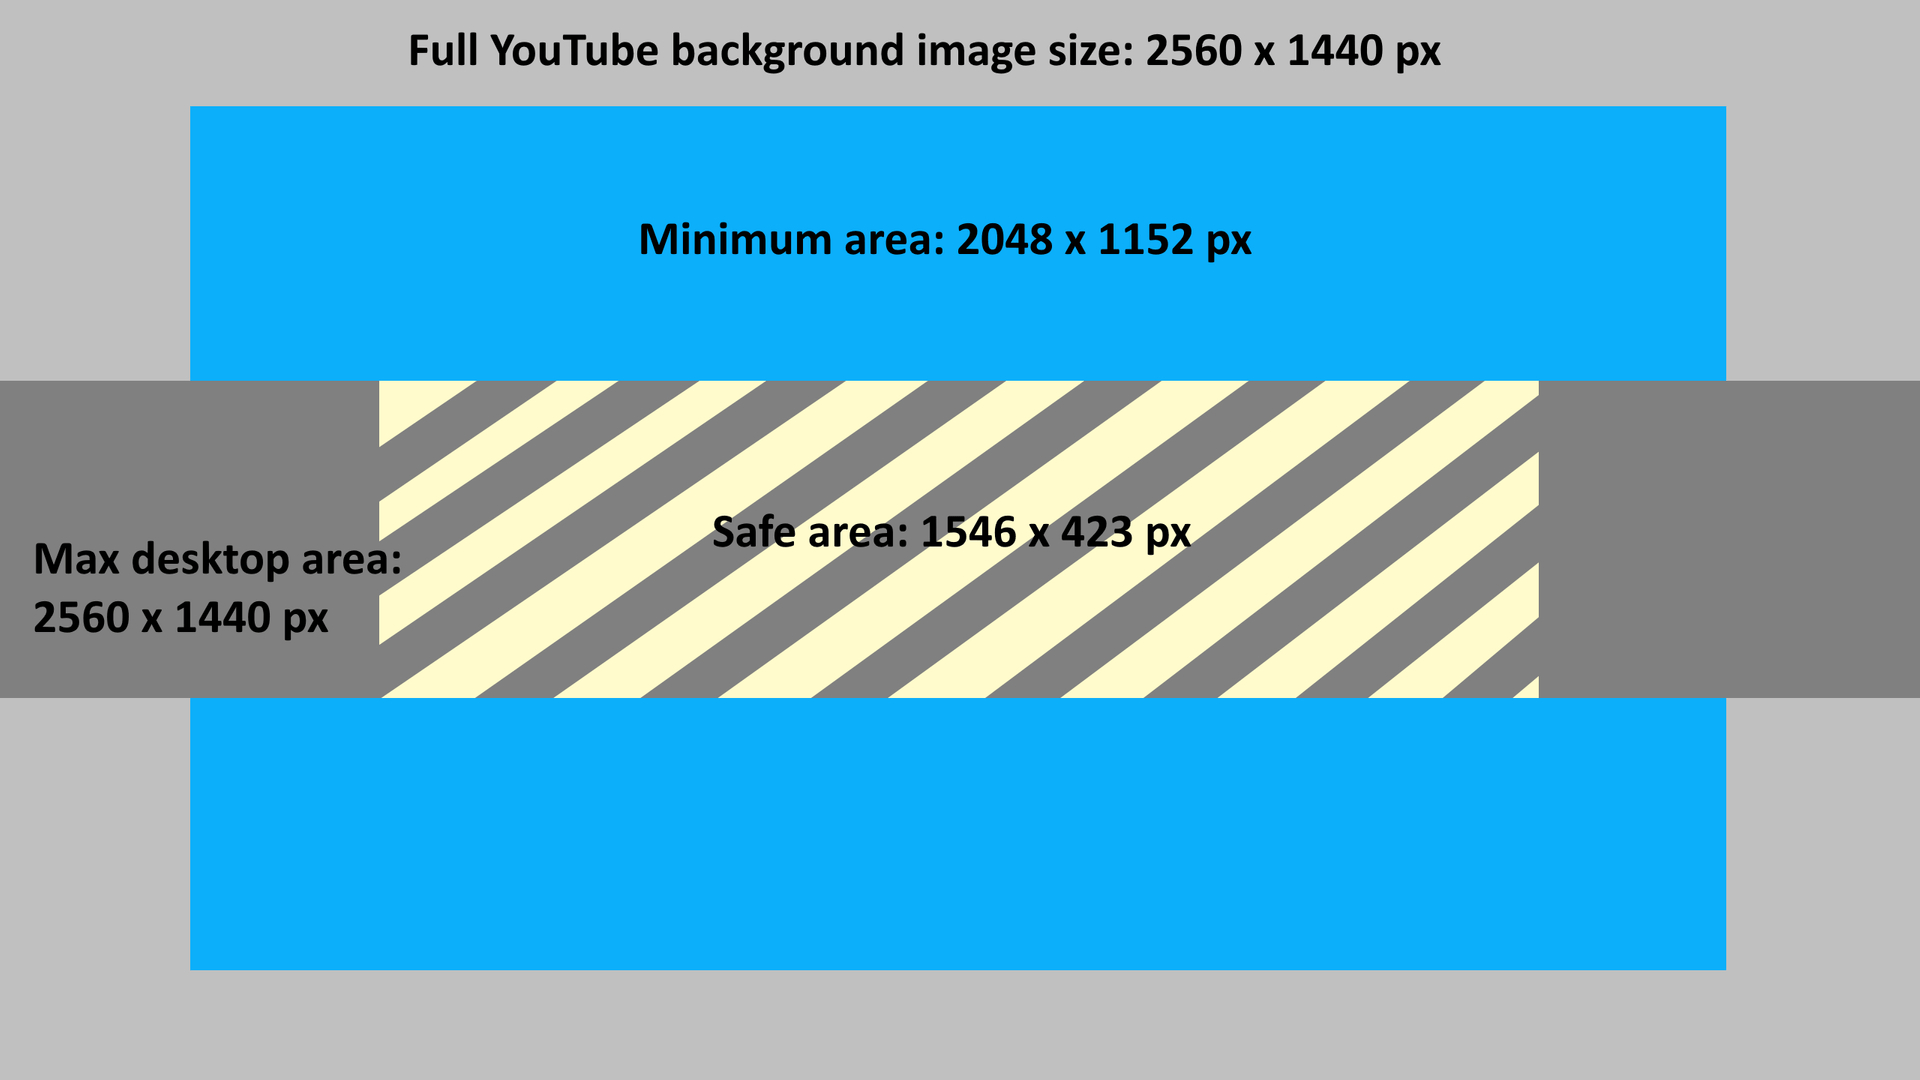 The Best Youtube Banner Size In 2020 + Best Practices For Within Youtube Banner Size Template